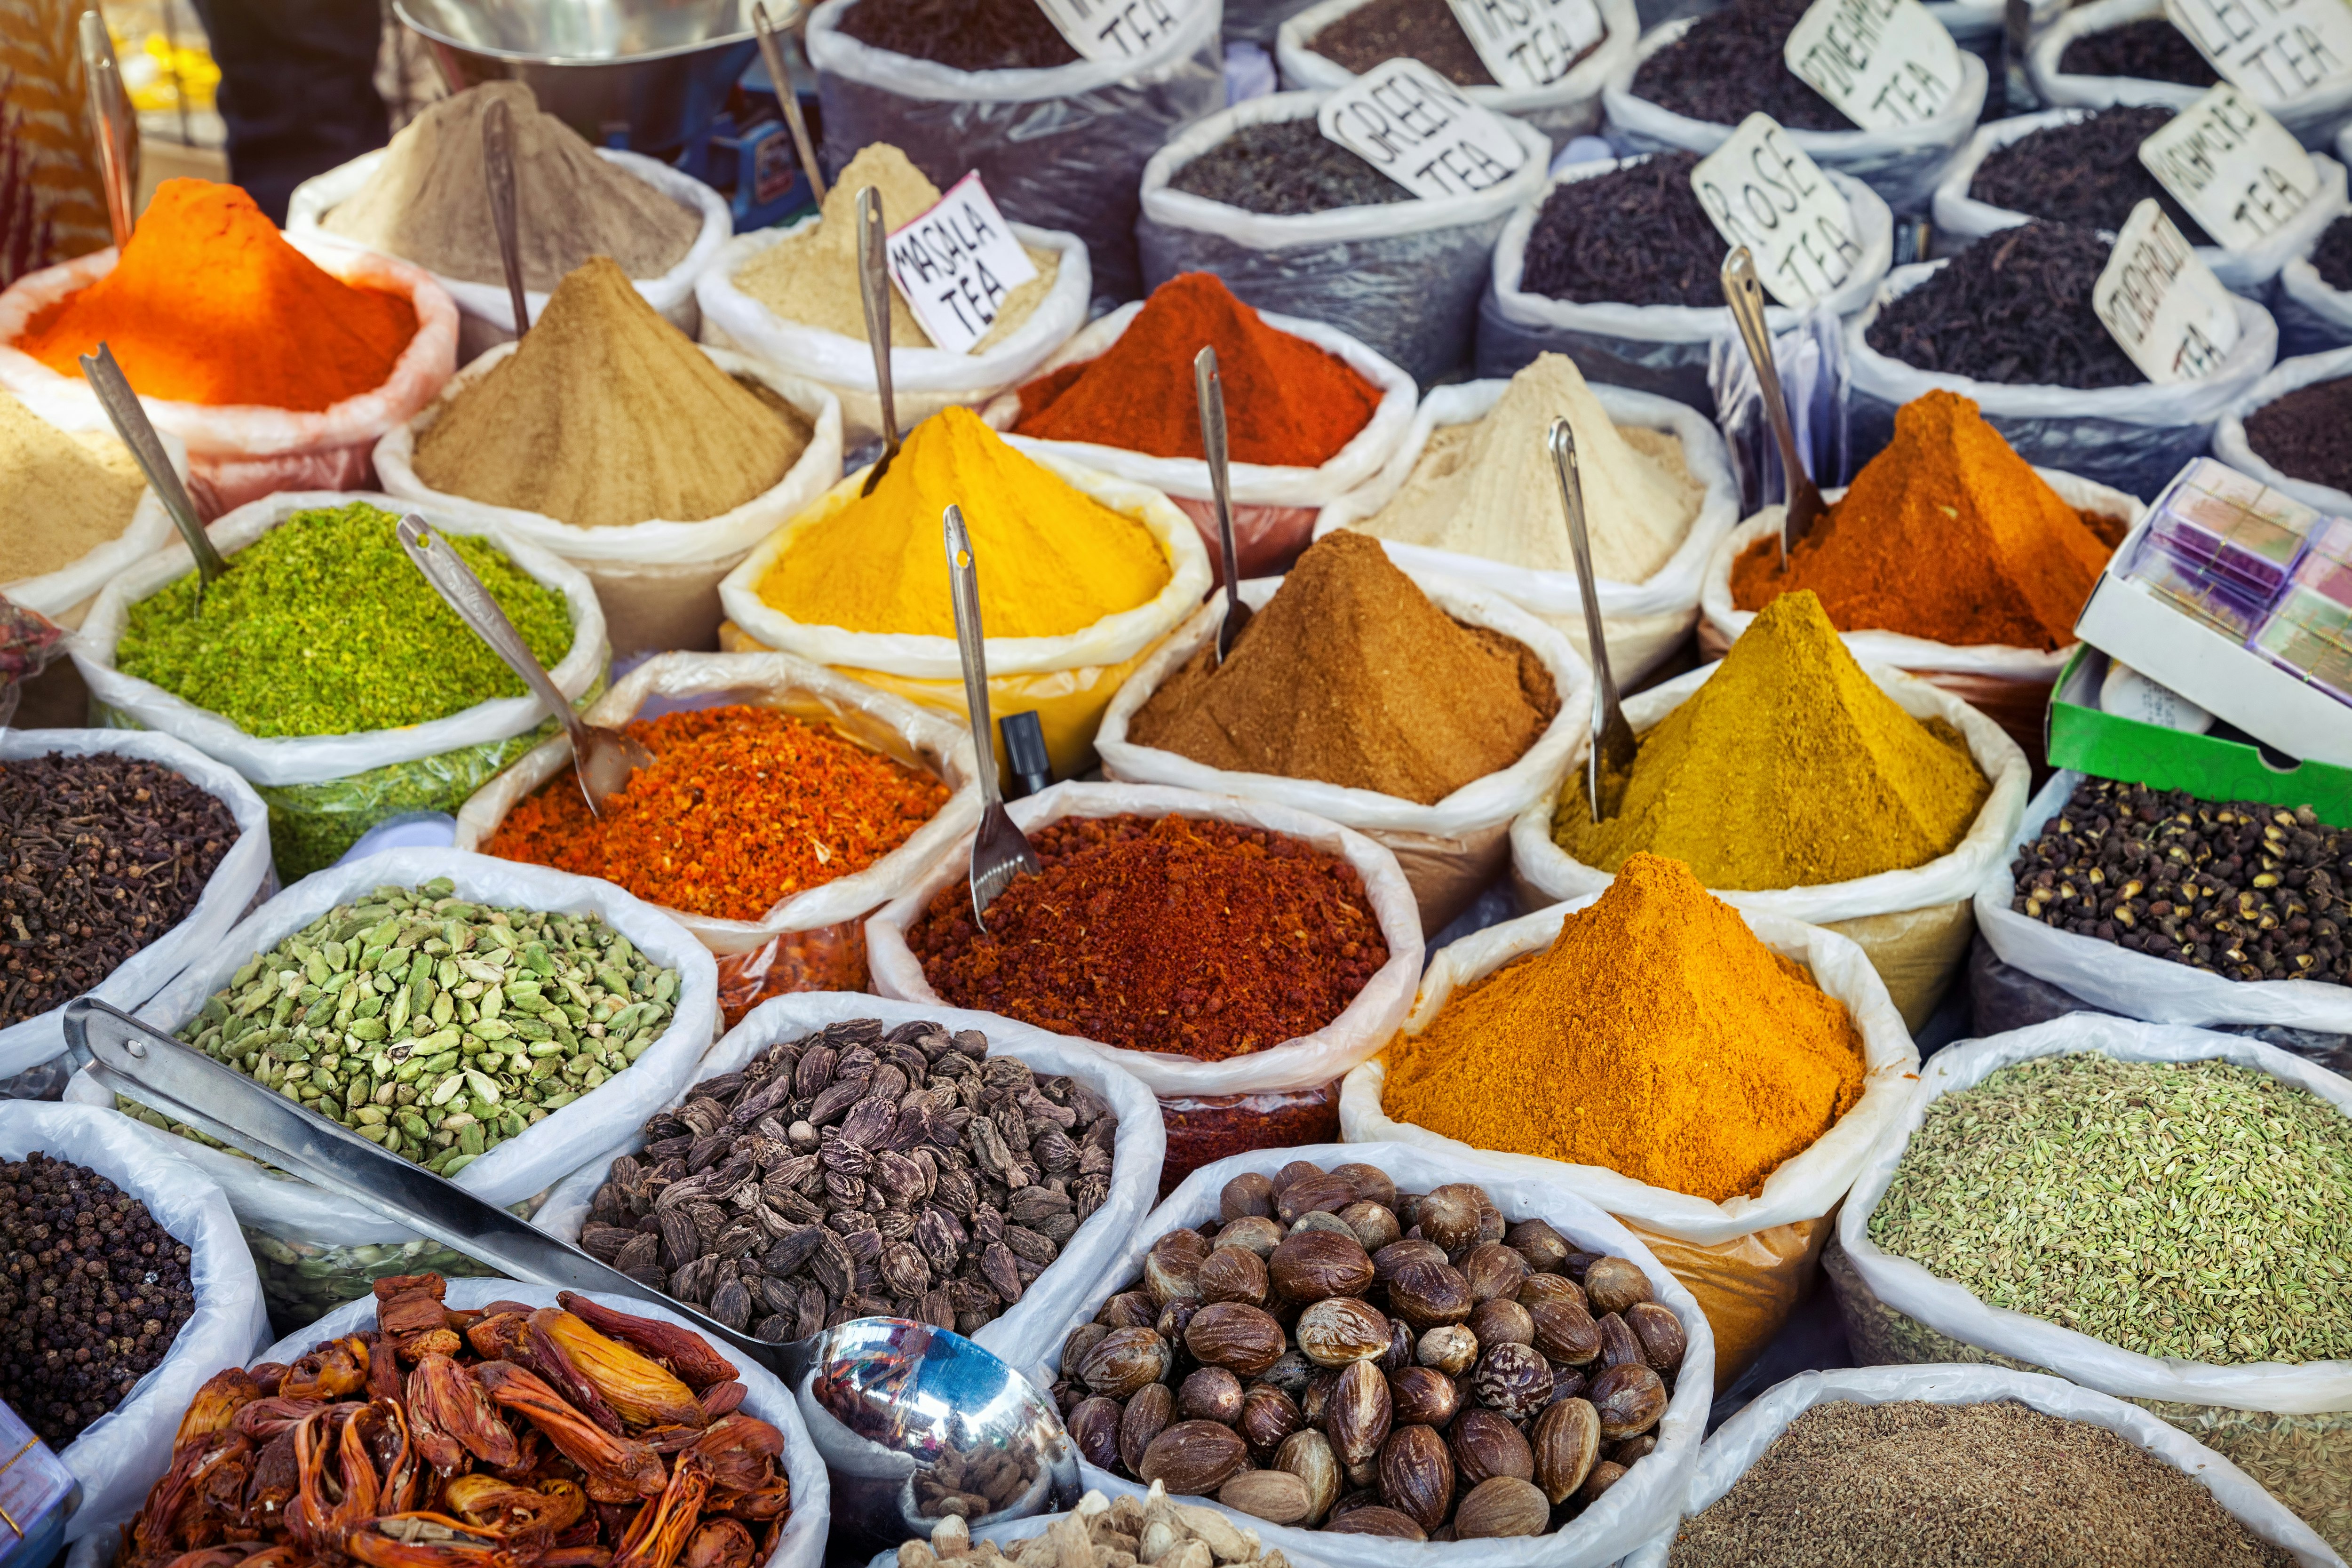 Piles of colorful spices in a market